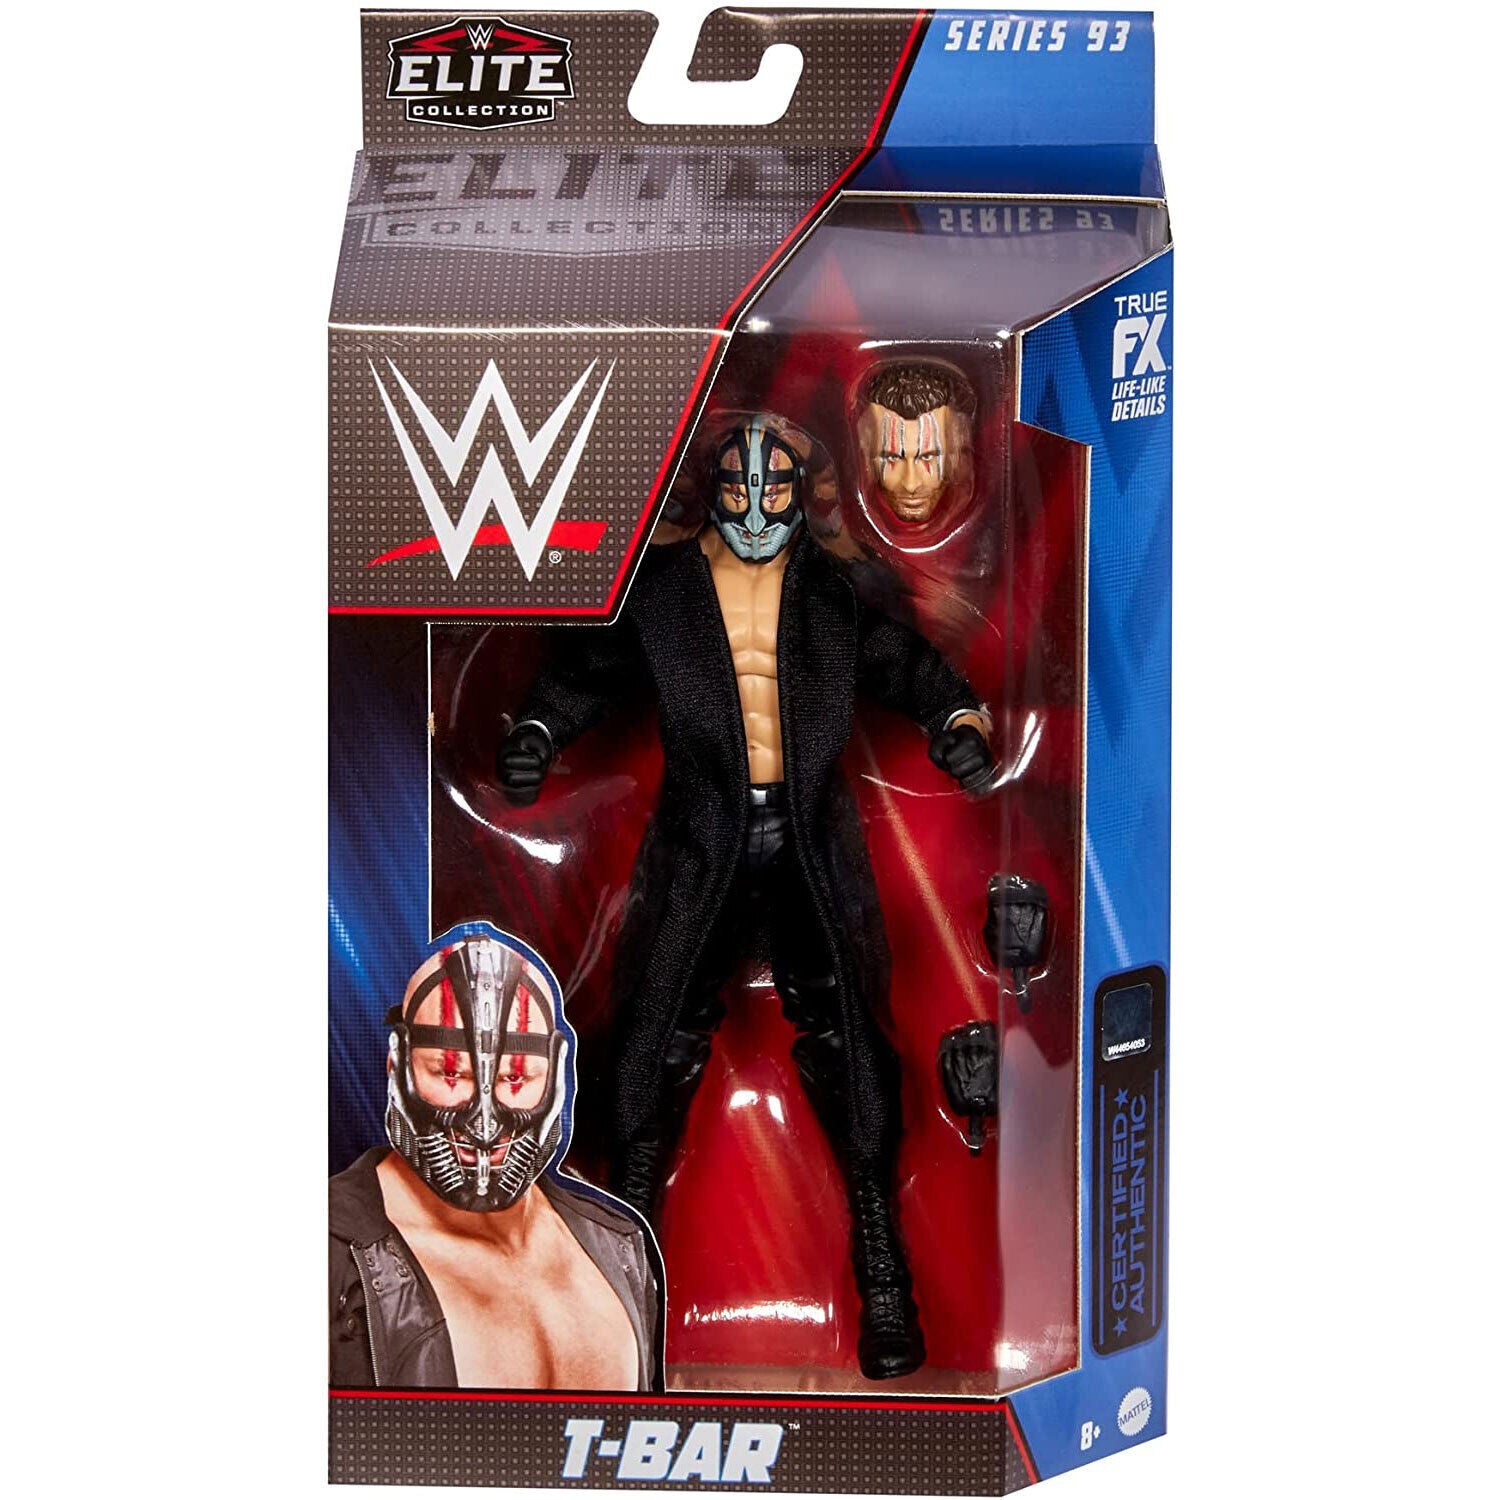 New WWE Elite Collection Series 93 T-Bar Action Figure